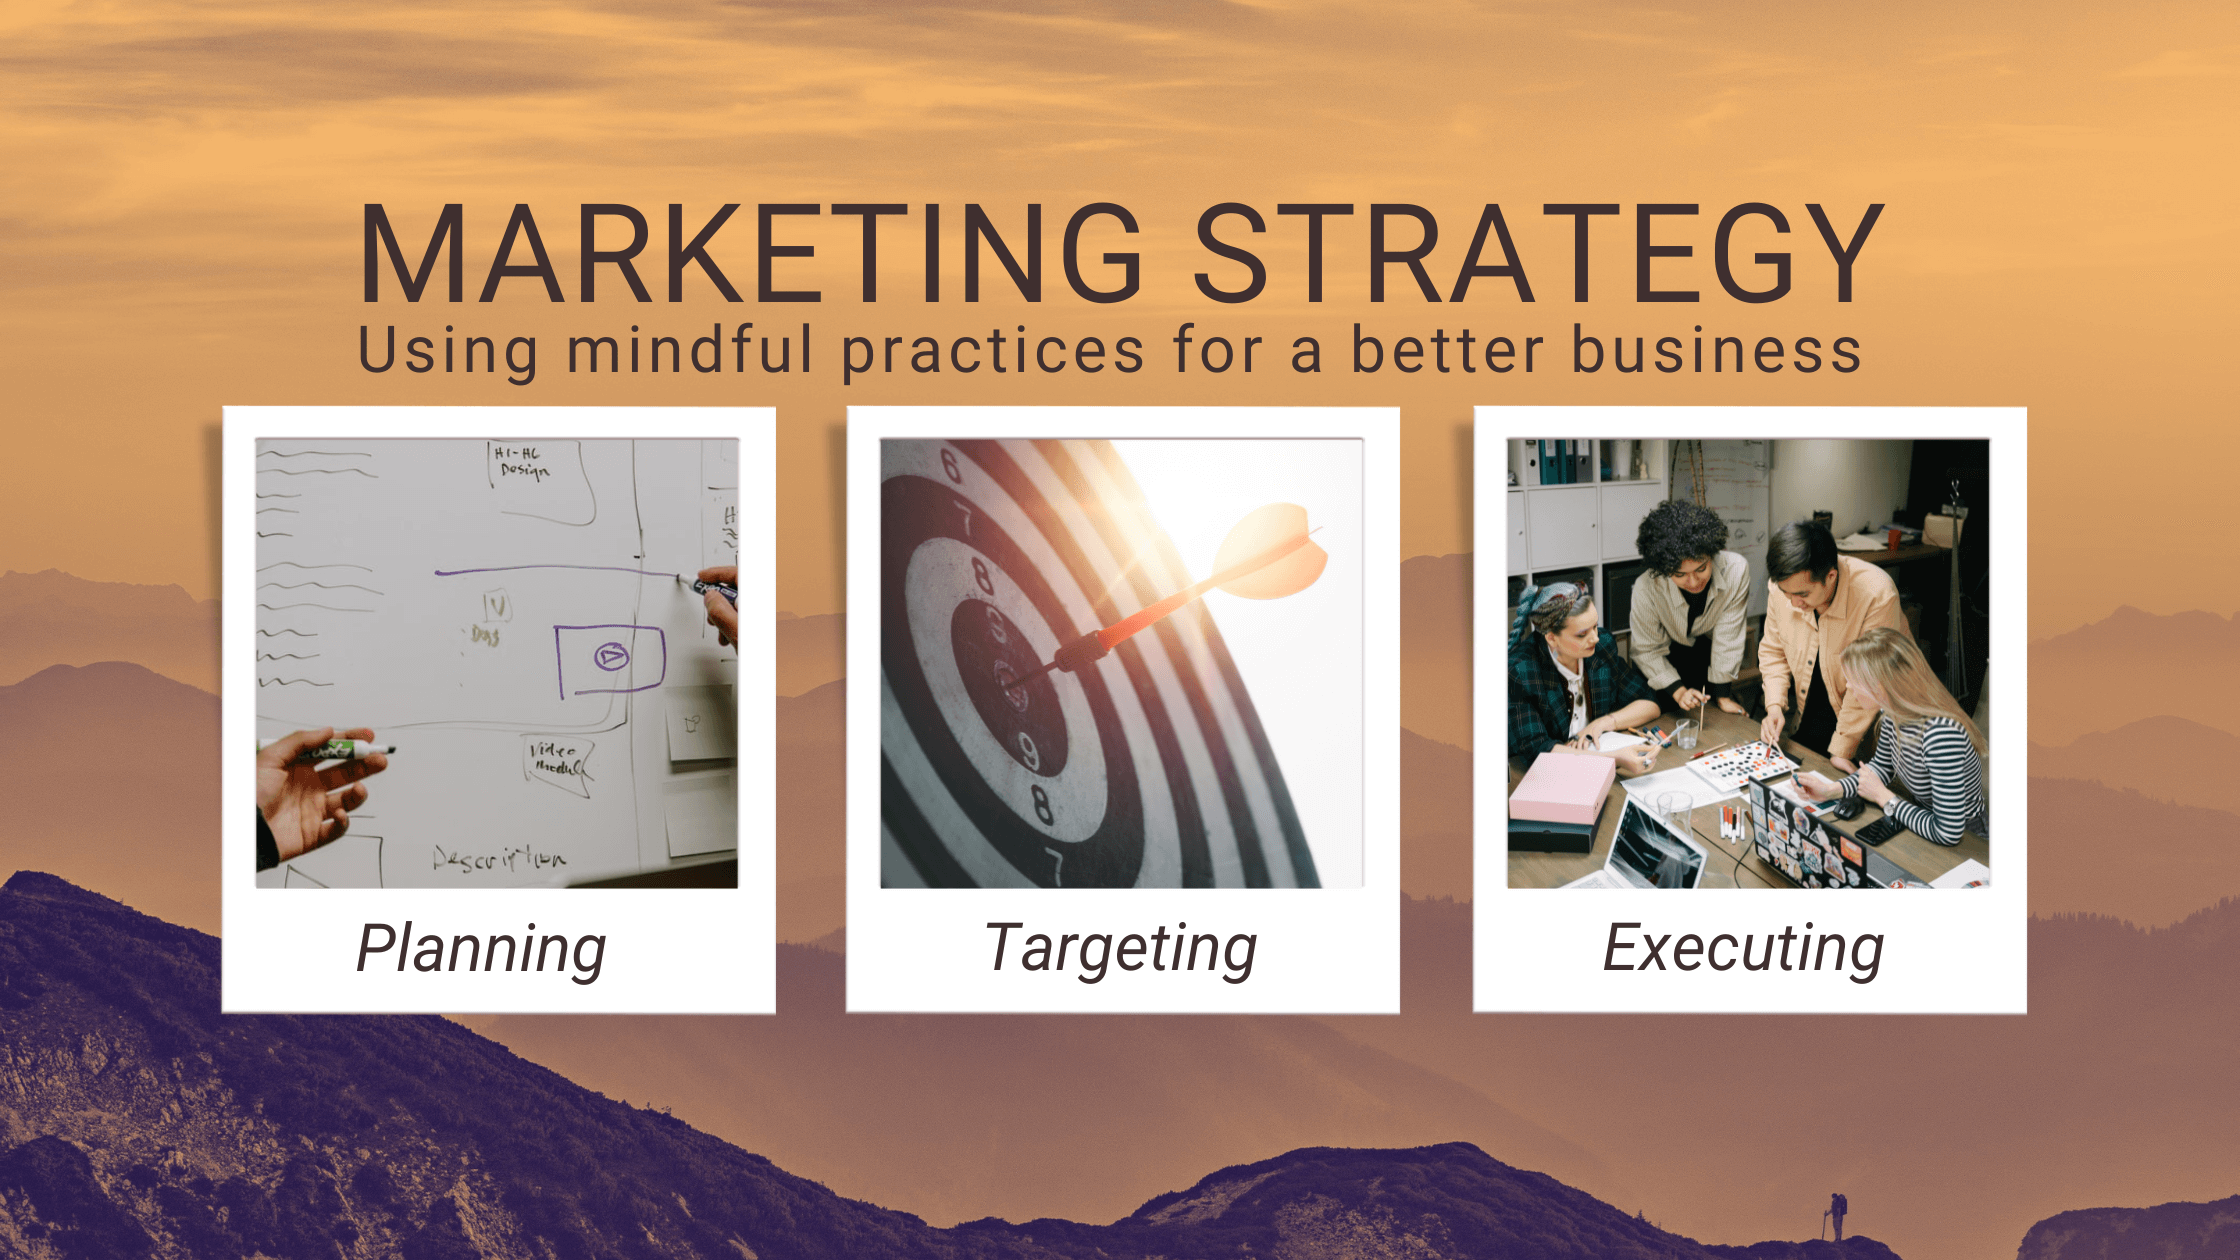 marketing strategy graphic with planning, targeting, and executing